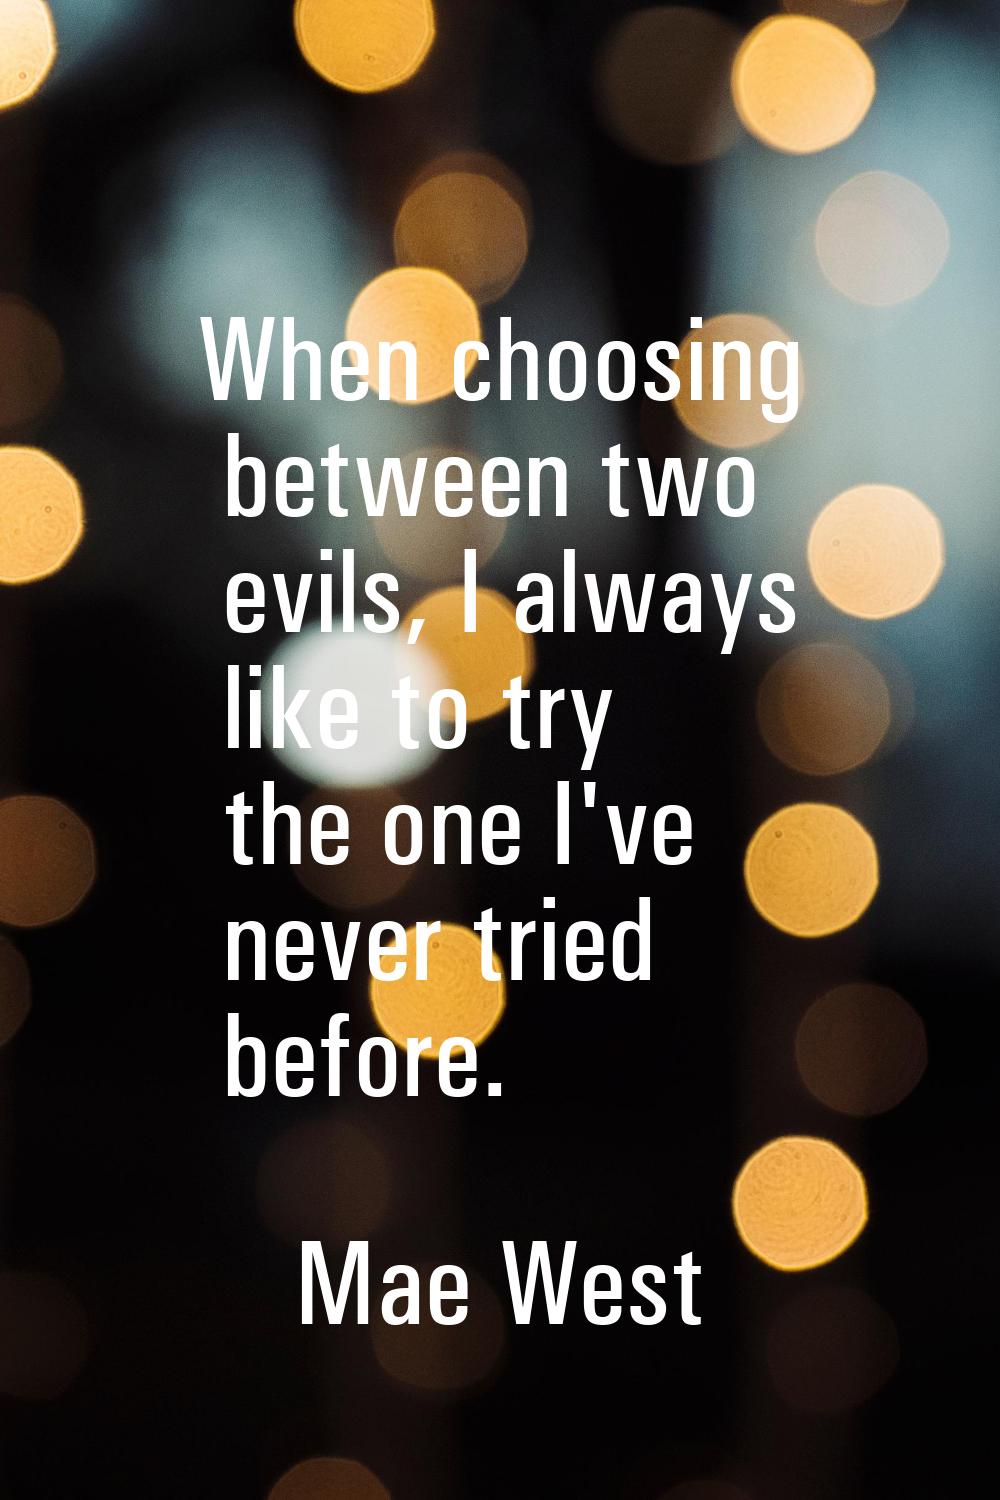 When choosing between two evils, I always like to try the one I've never tried before.